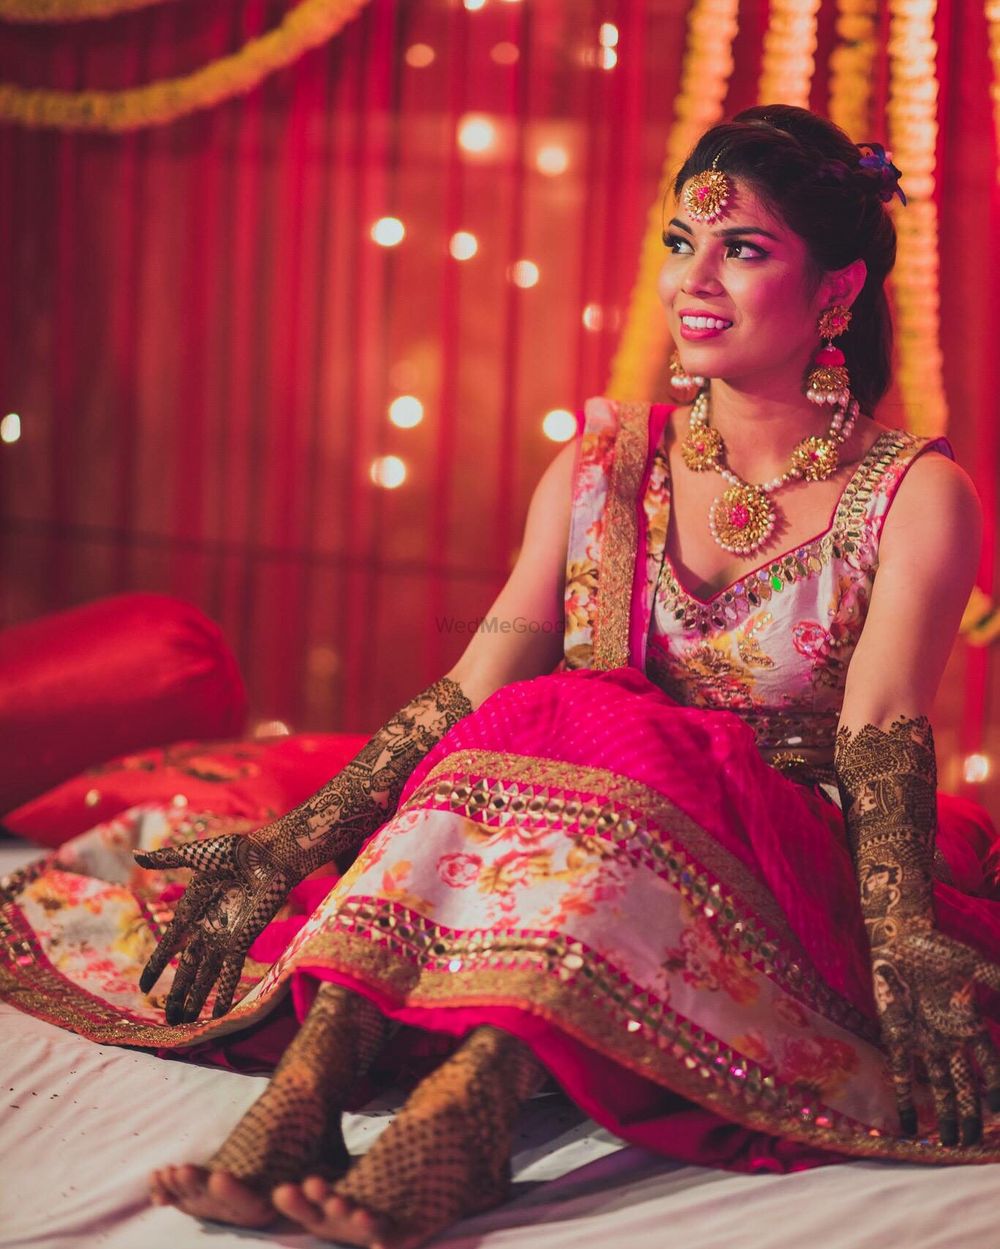 Photo of Bridal Portrait with Jali Mehendi on Hands and Feet